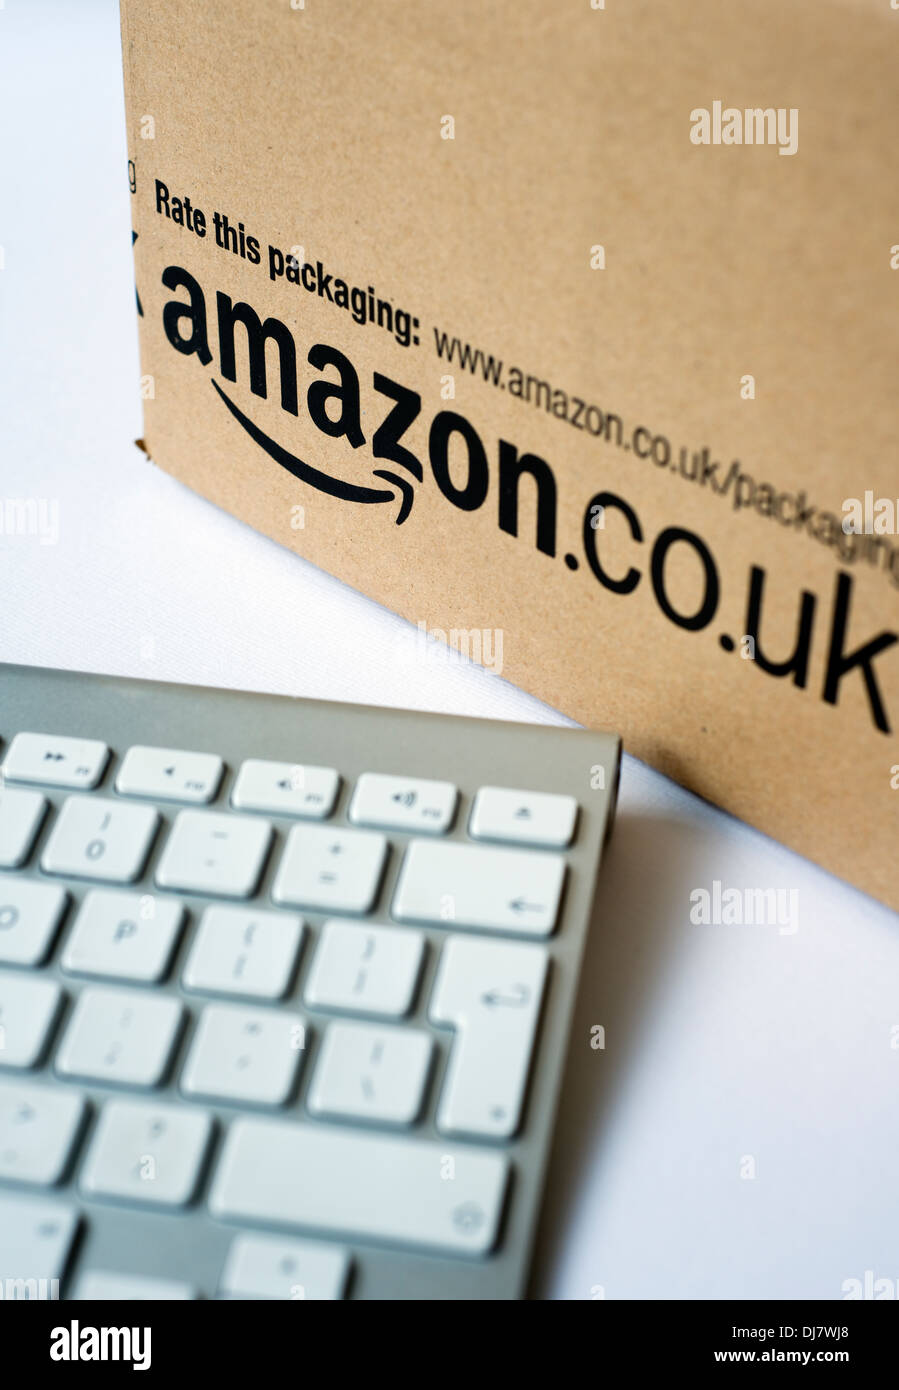 Amazon Packaging High Resolution Stock Photography and Images - Alamy